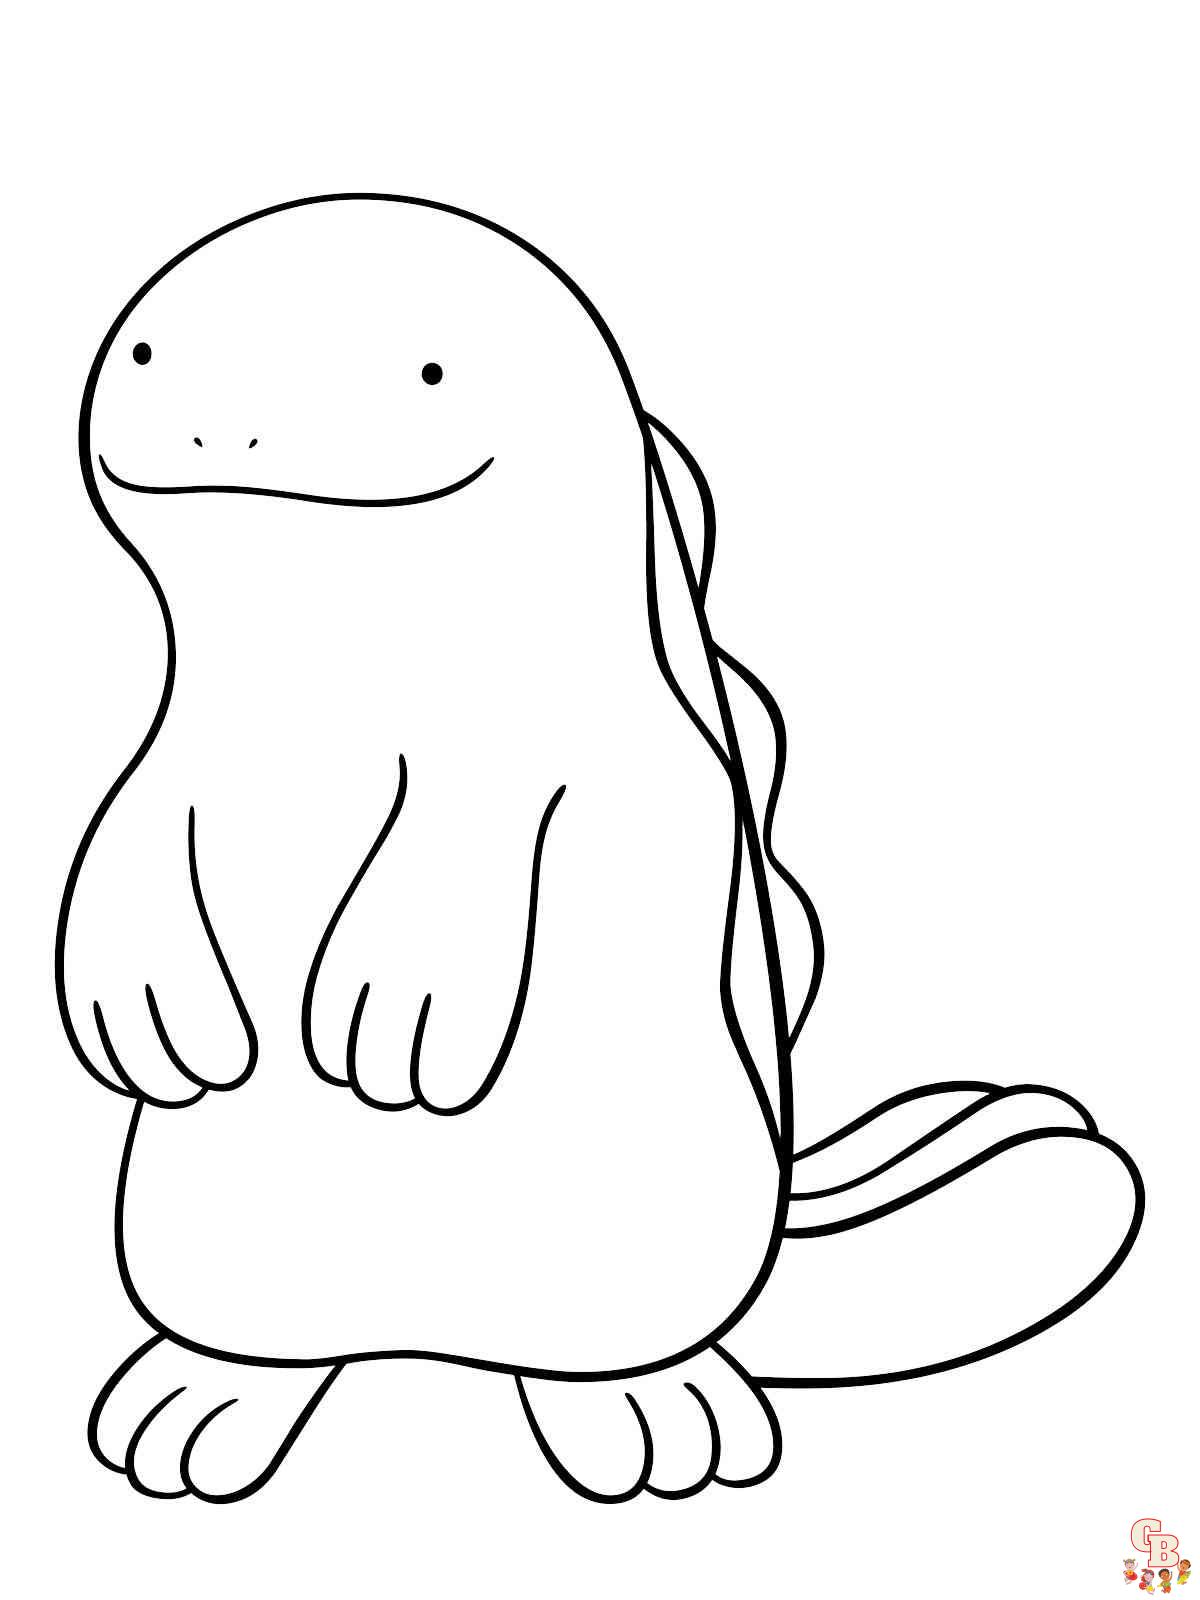 Quagsire Coloring Pages 2